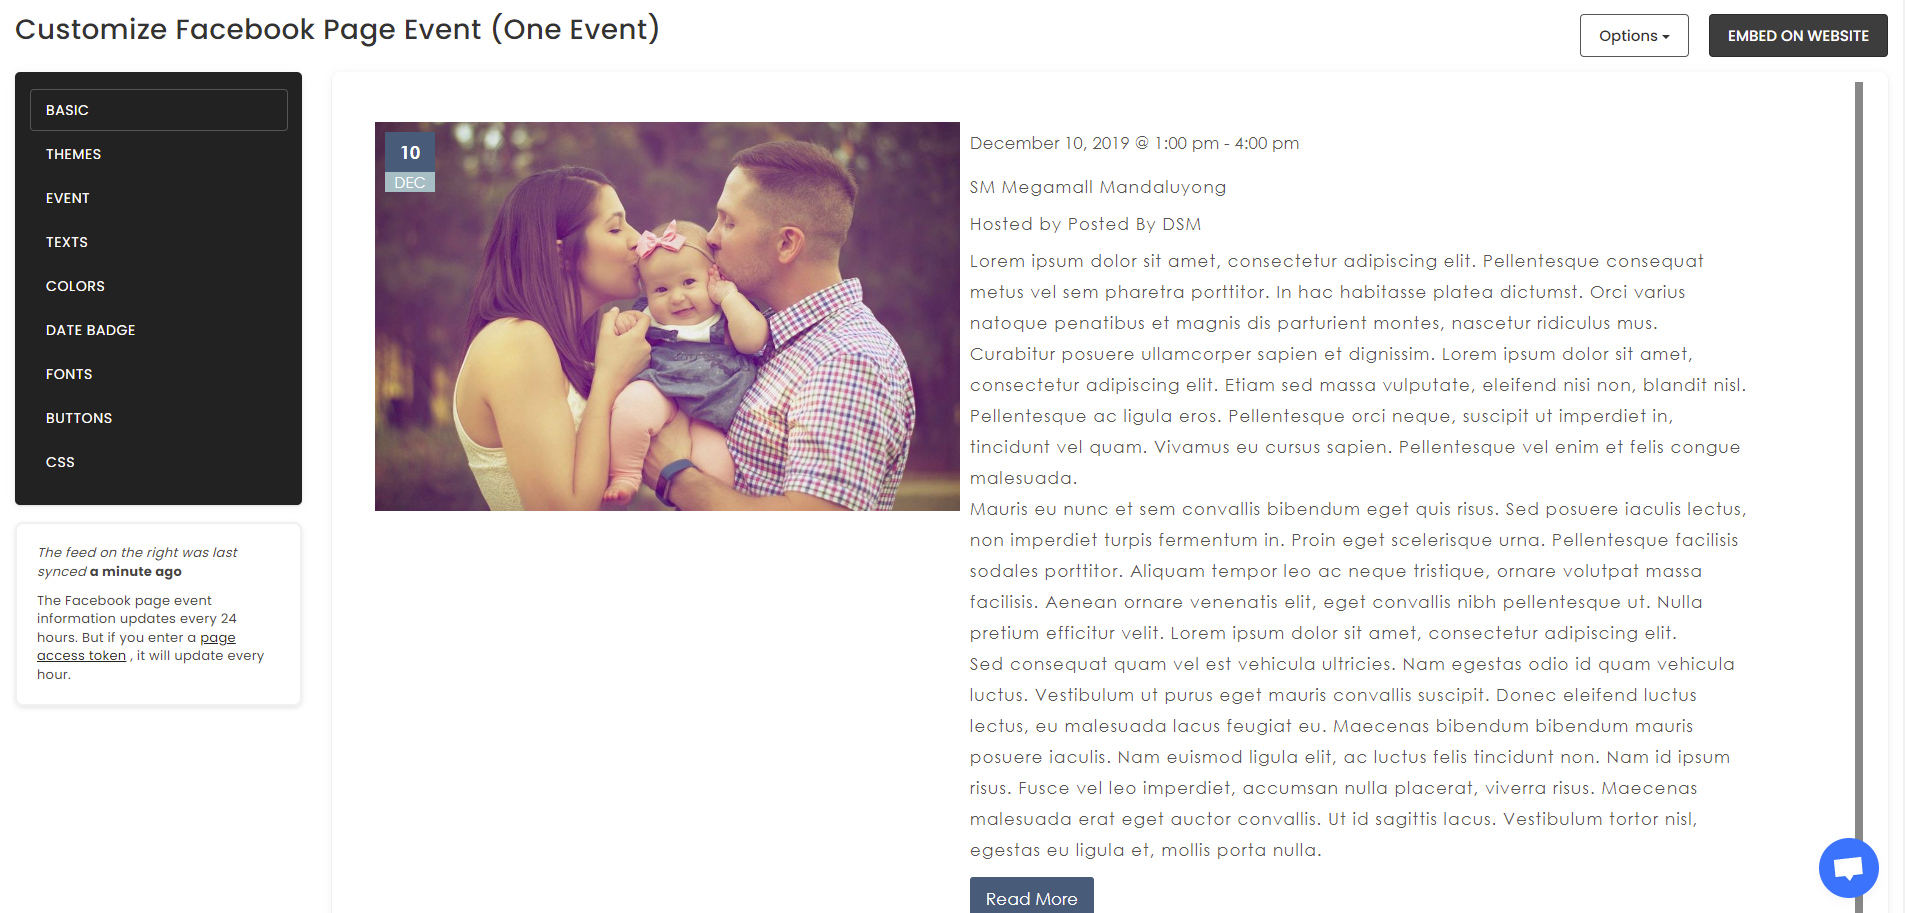 Customize your feed - How To Embed Facebook Page Event (One Event) On Weebly Website For Free?